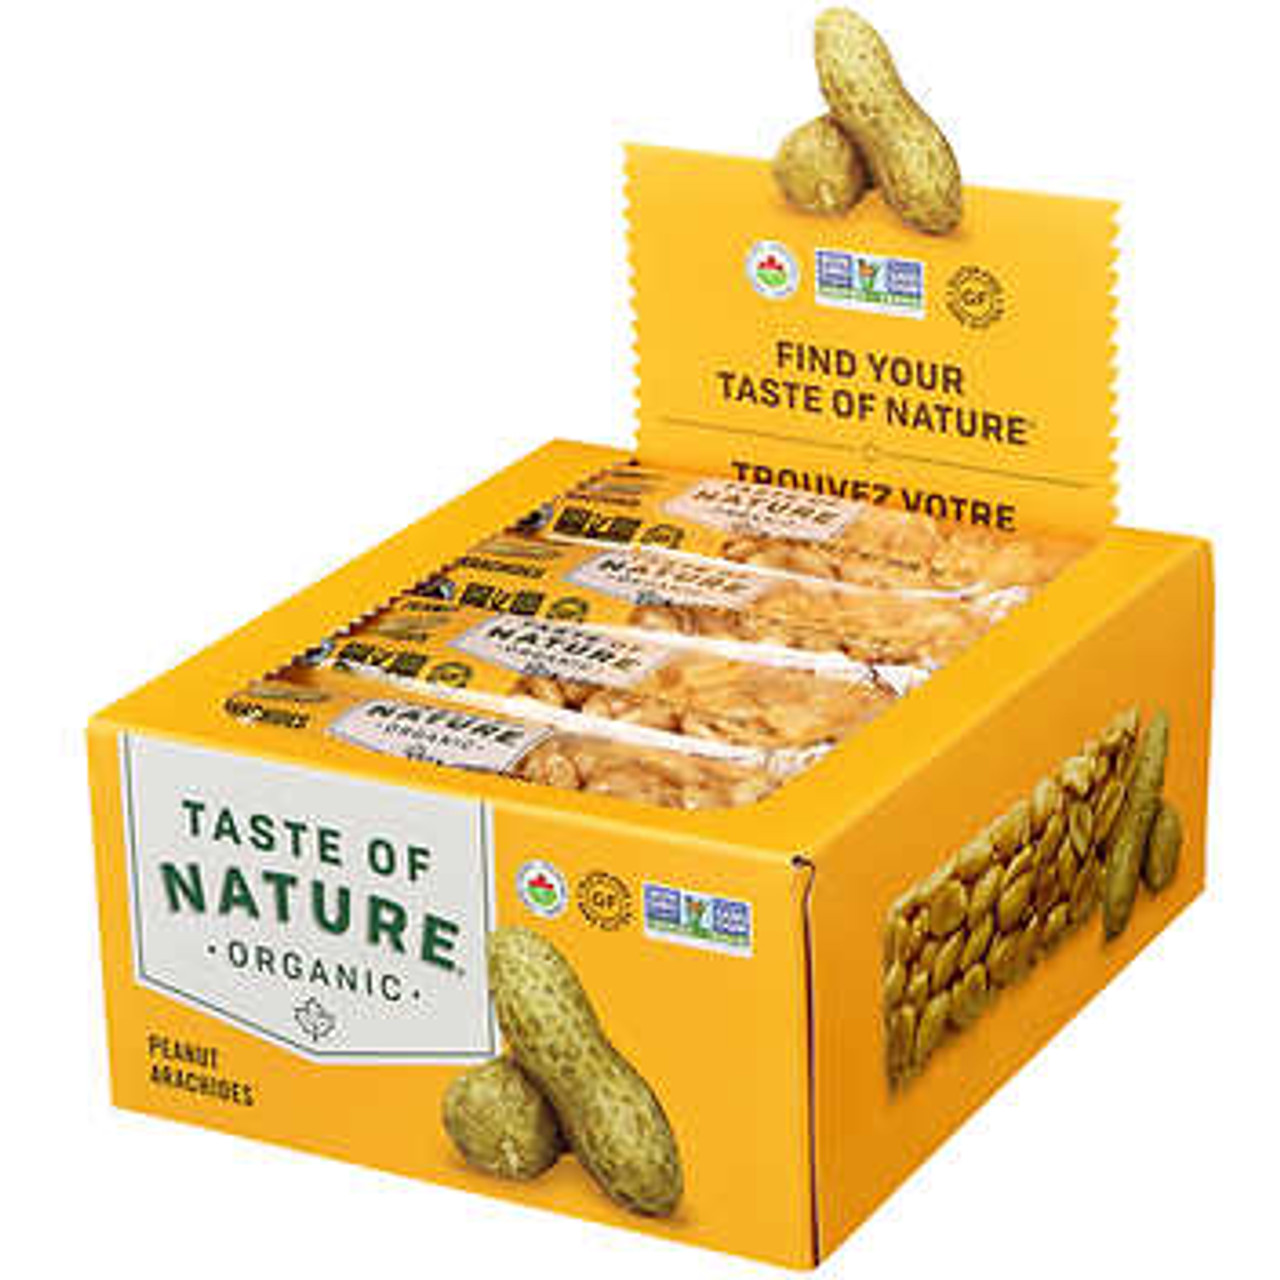 Taste of Nature Organic Peanut Snack Bar - Wholesome Peanut Goodness in Every Bite- Chicken Pieces